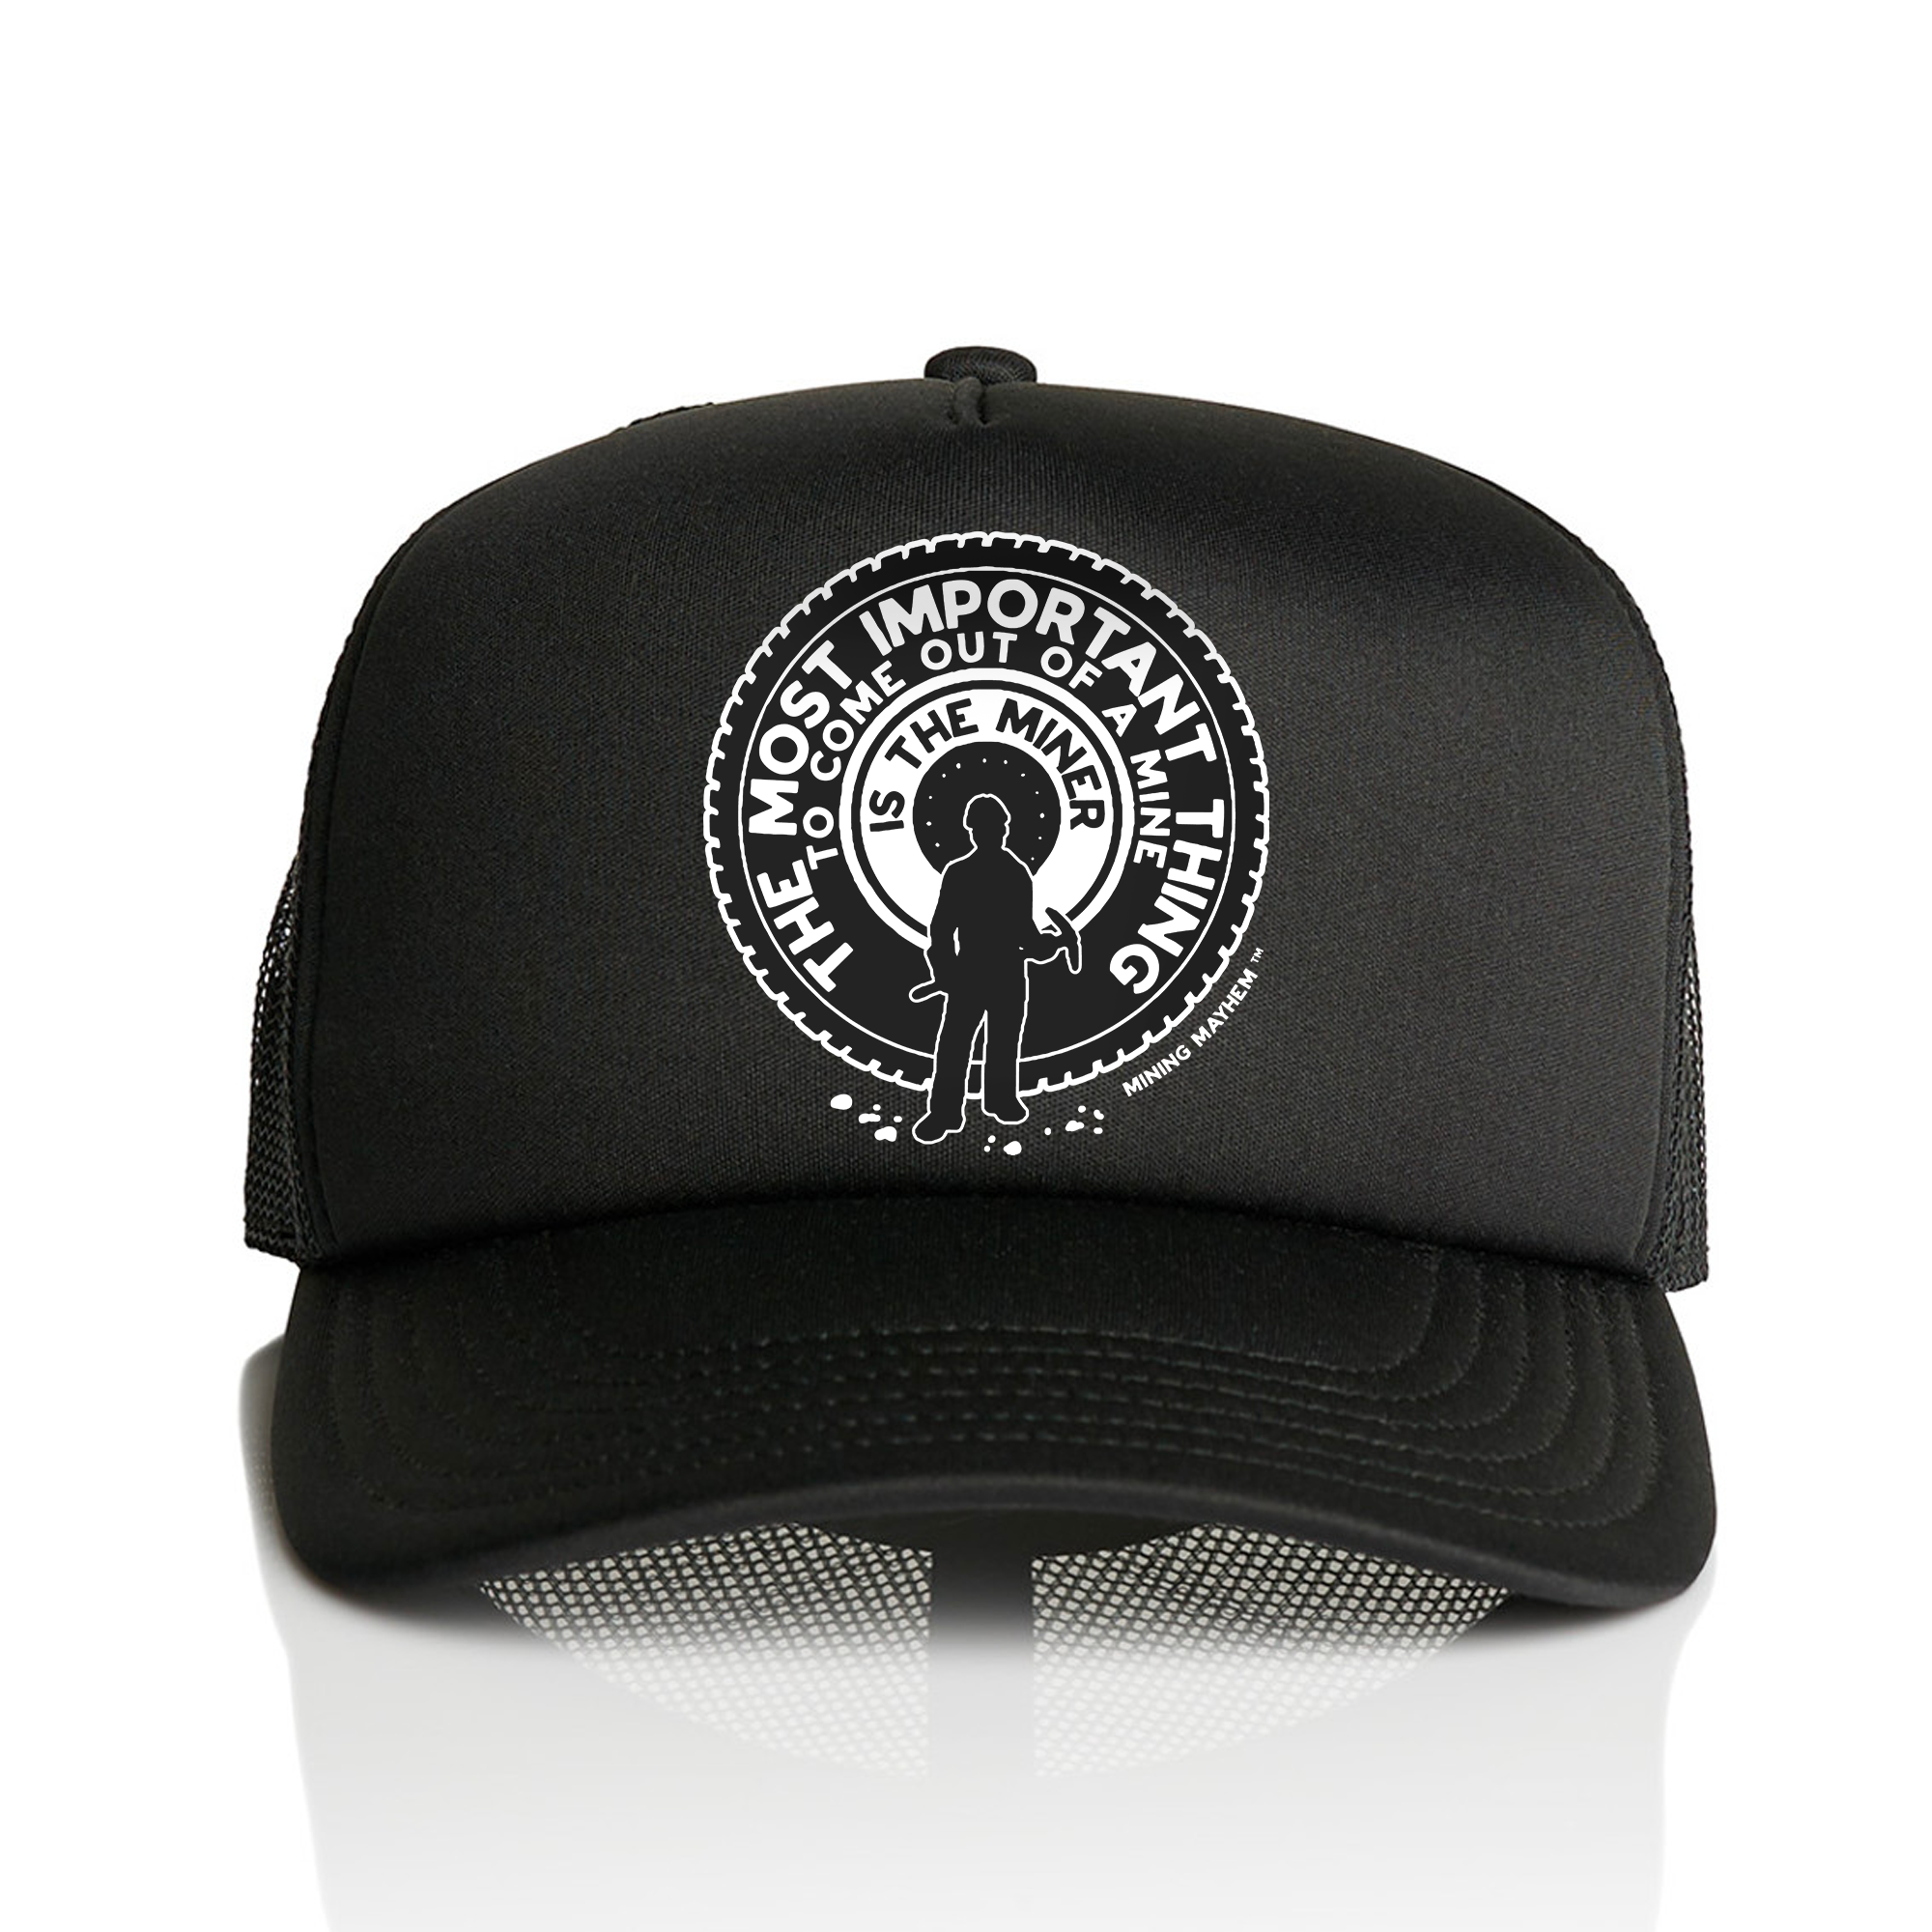 The Most Important Thing To Come Out Of A Mine - Trucker Caps (Black)